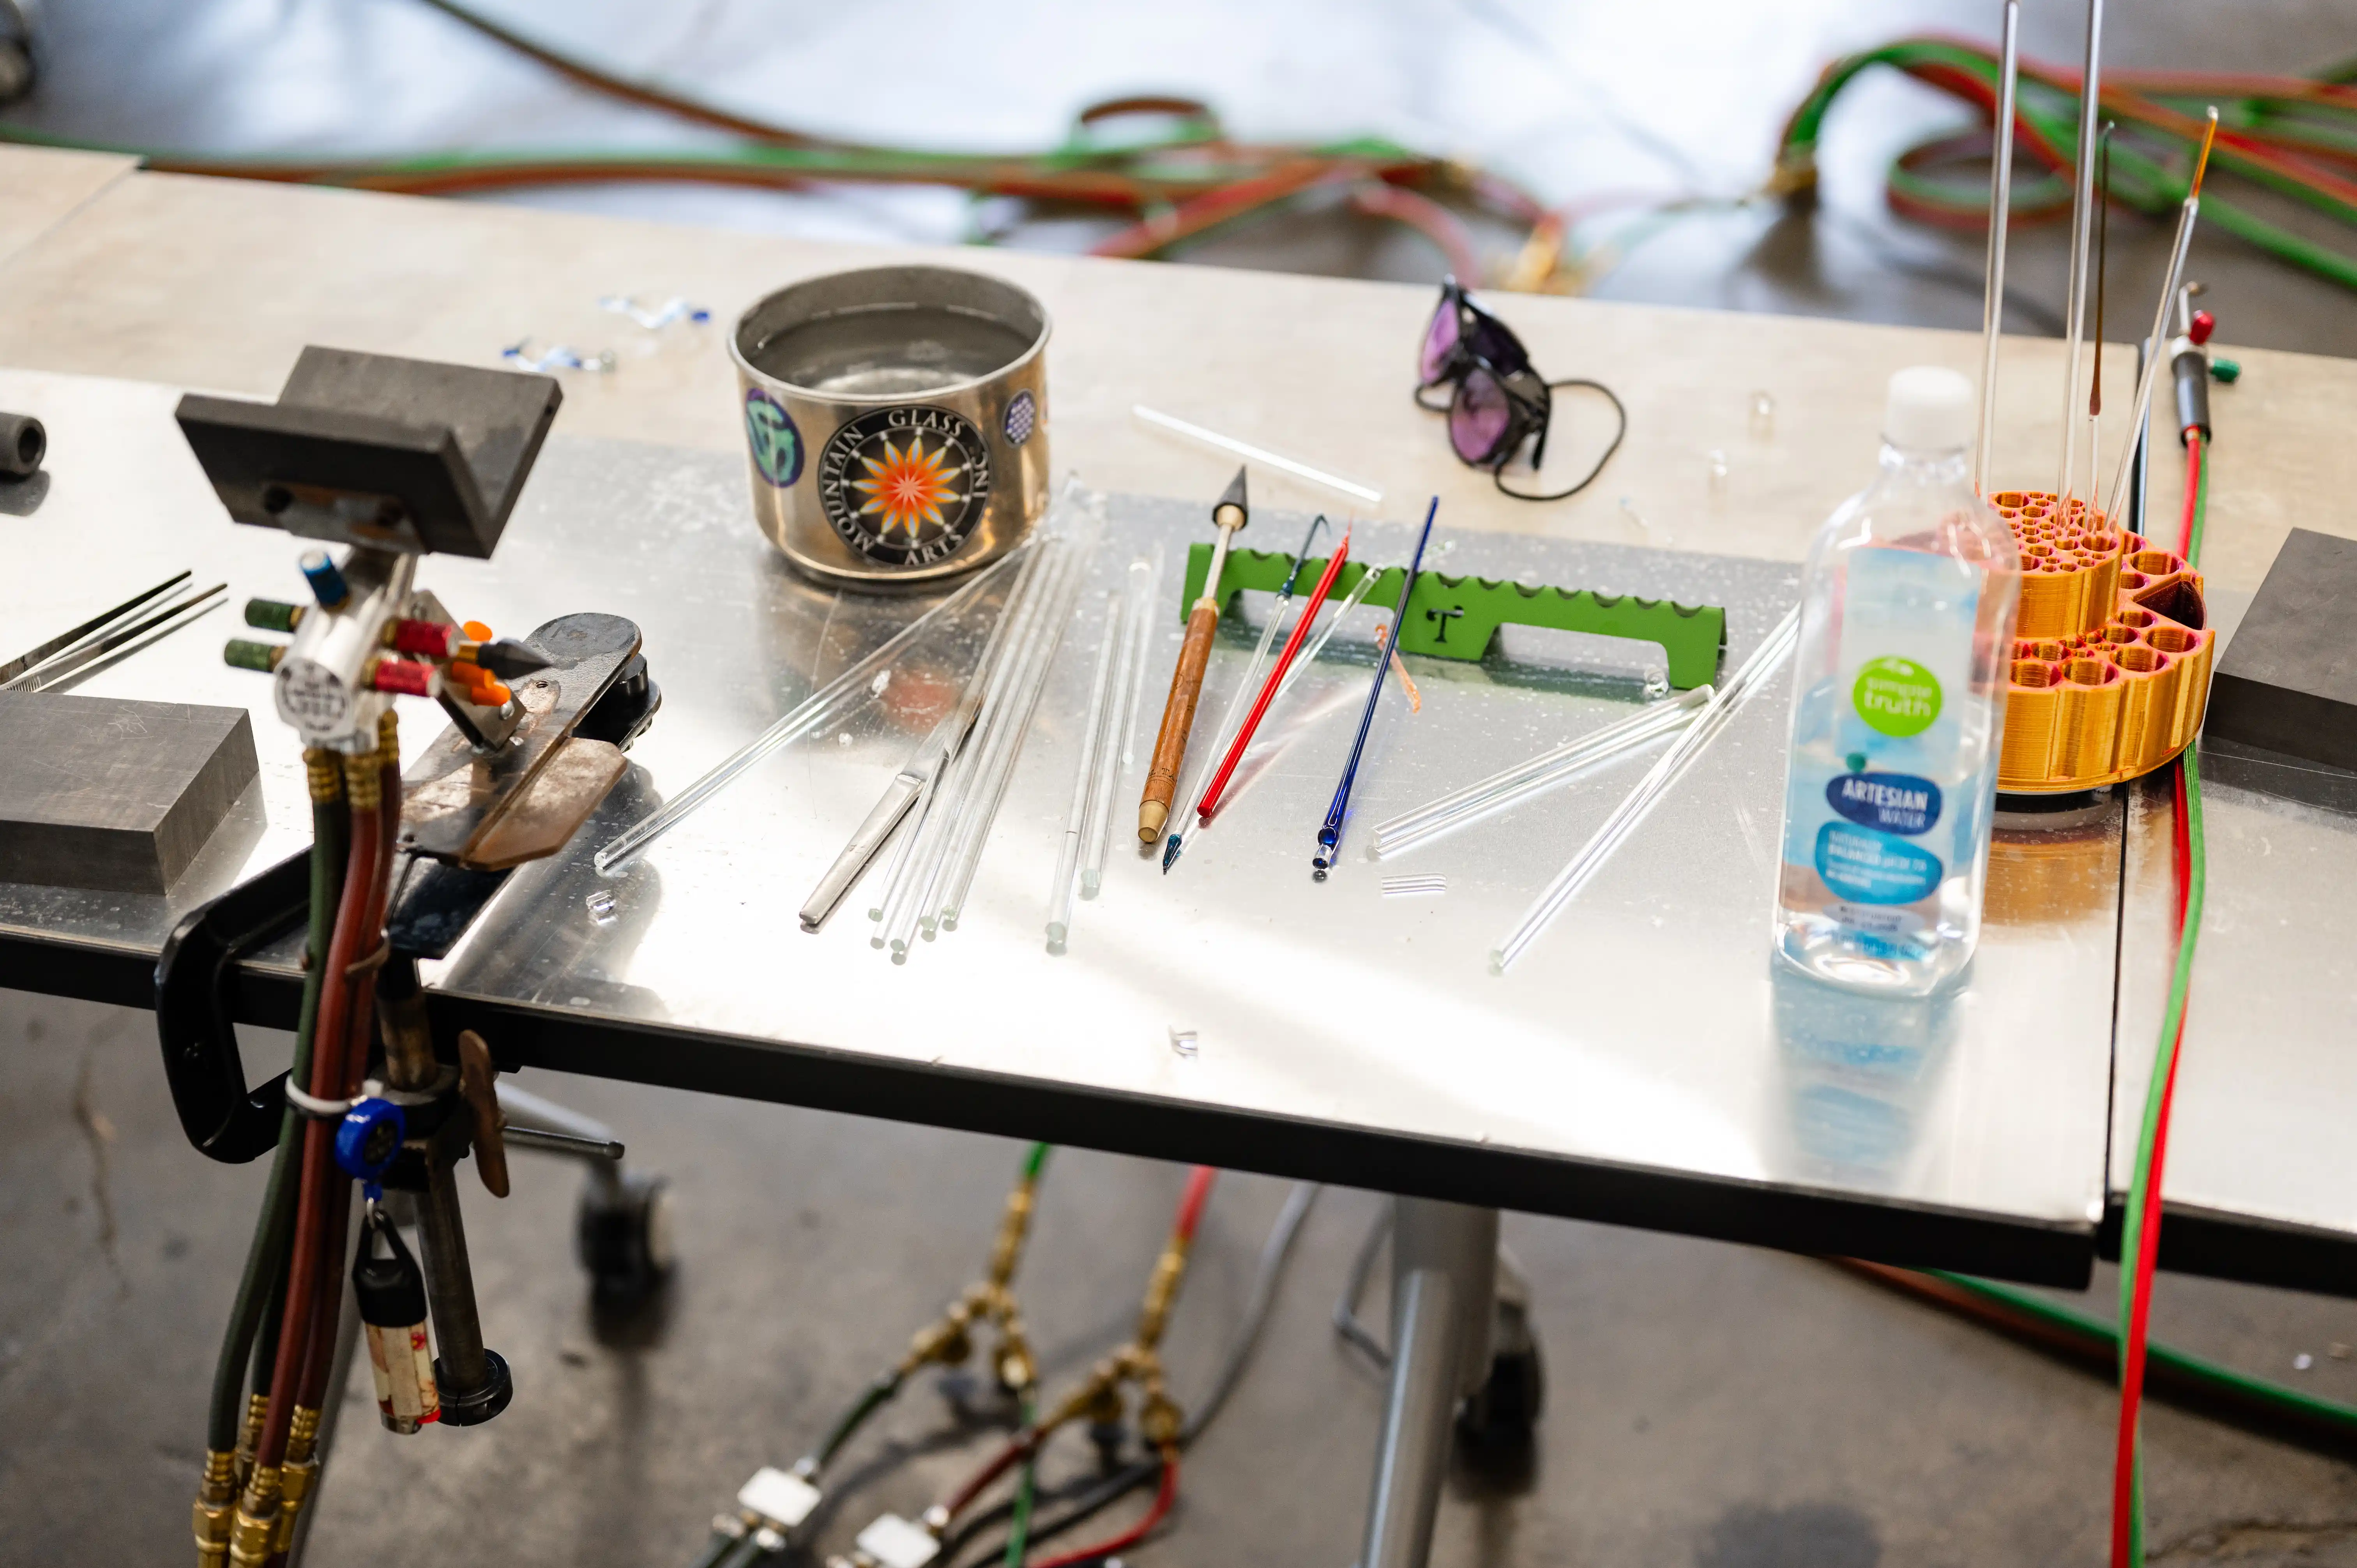 A workbench in a glassblowing studio with various tools, colored glass rods, a tin can, protective glasses, and a bottle of water.